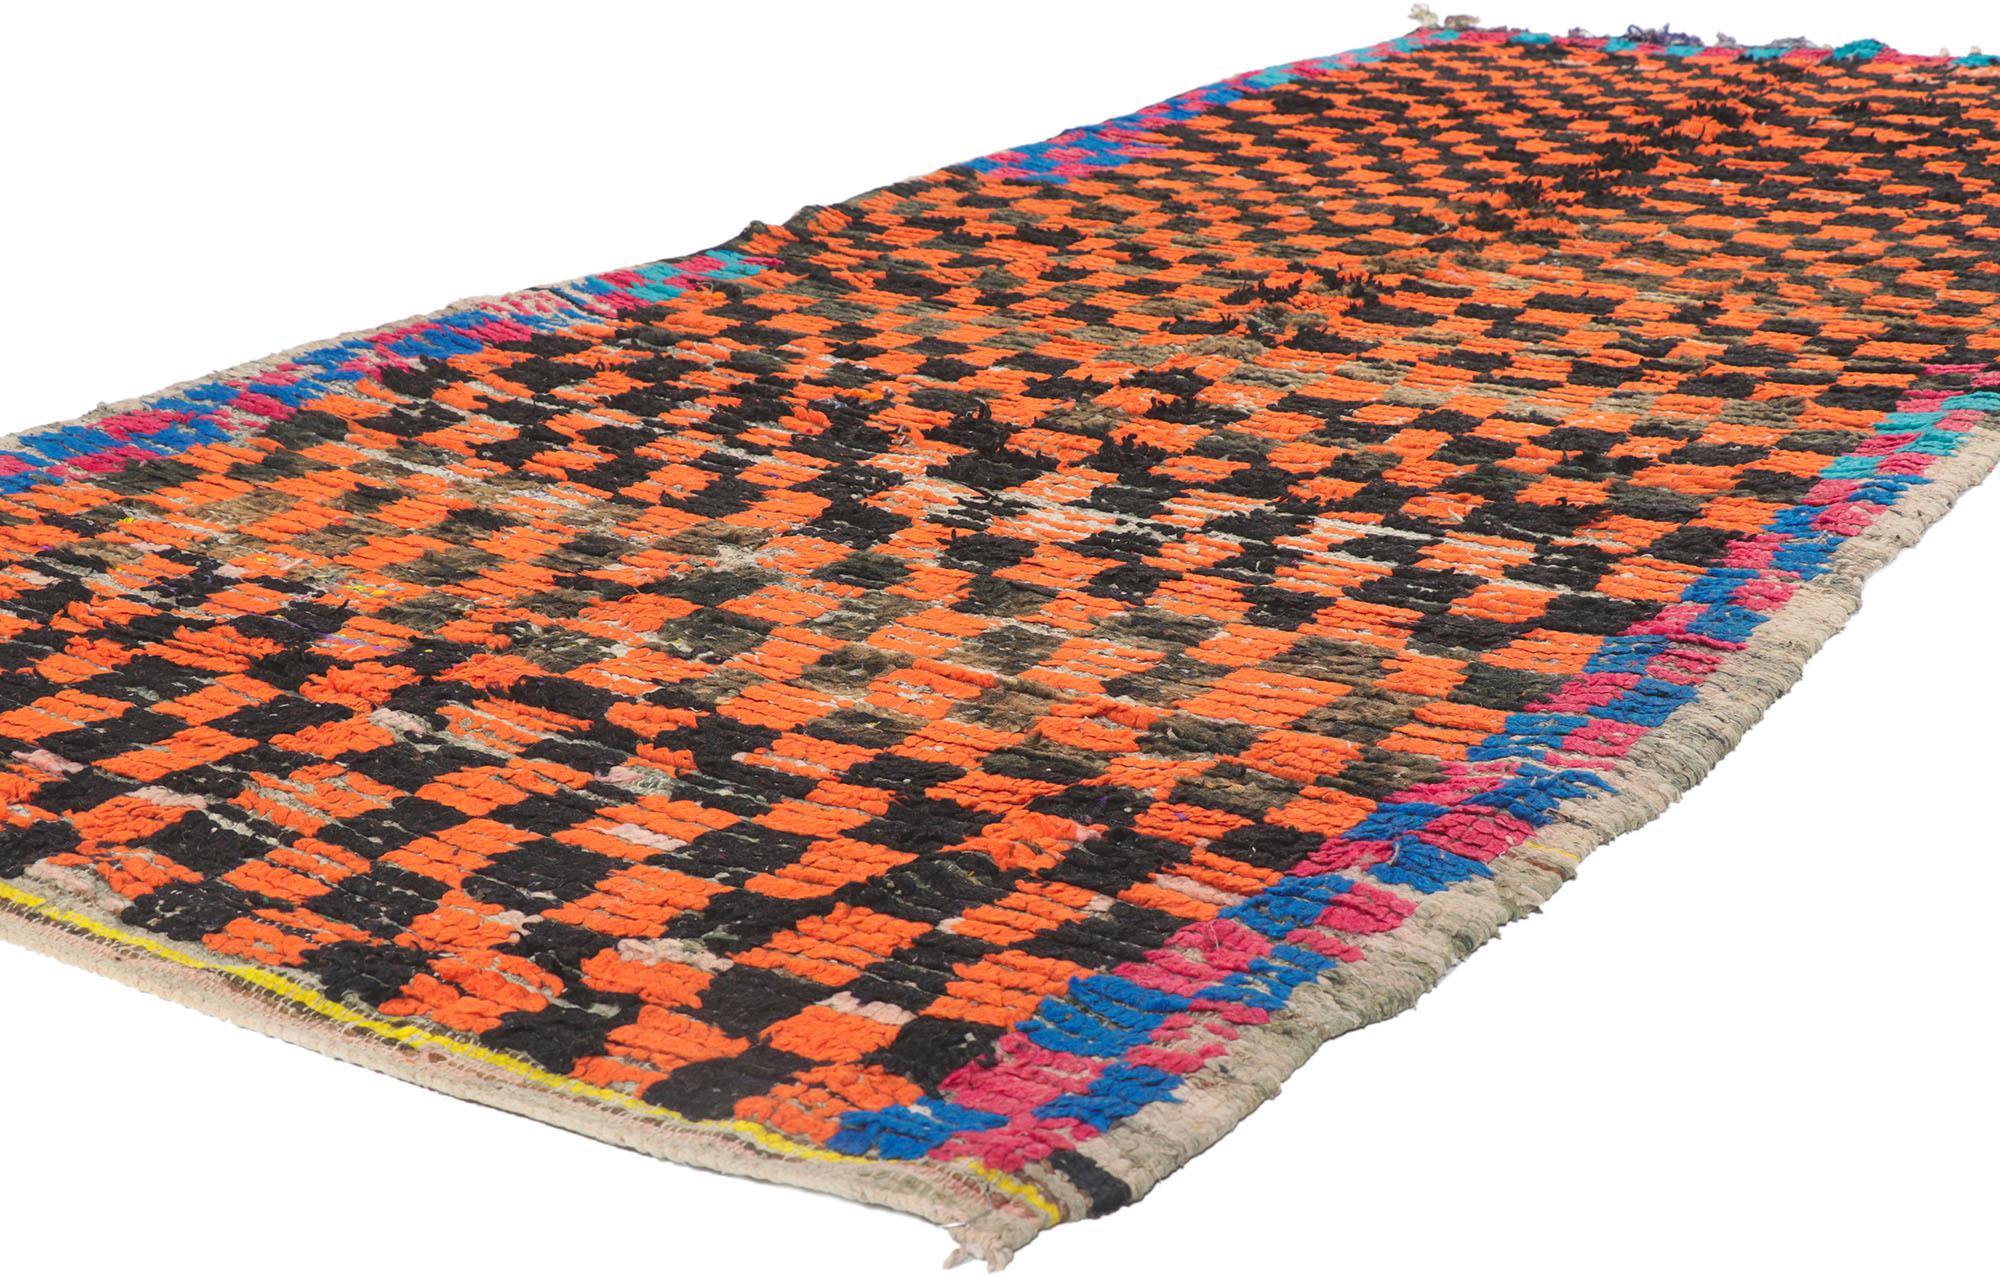 21507 Vintage Checkered Moroccan Azilal Rug, 04'02 x 09'00. Enter the captivating world of Azilal rugs, where every thread weaves a tale intricately crafted by skilled artisans amidst the dynamic landscapes of central Morocco and the majestic High